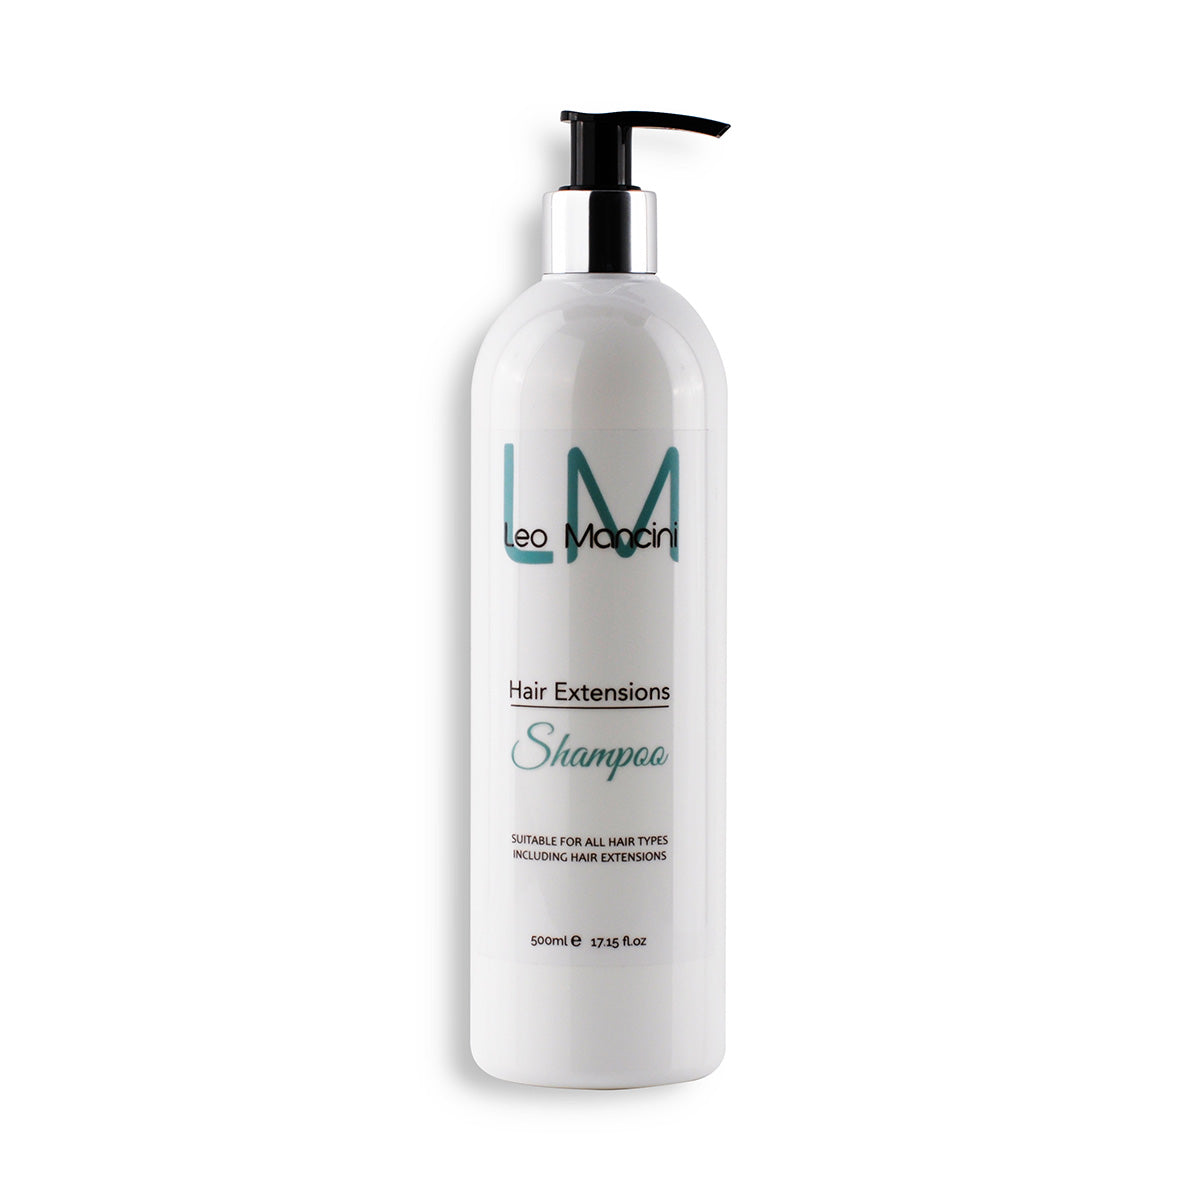 Shampoo for Hair Extensions and Long Hair, Refreshing Nourishing Strengthening